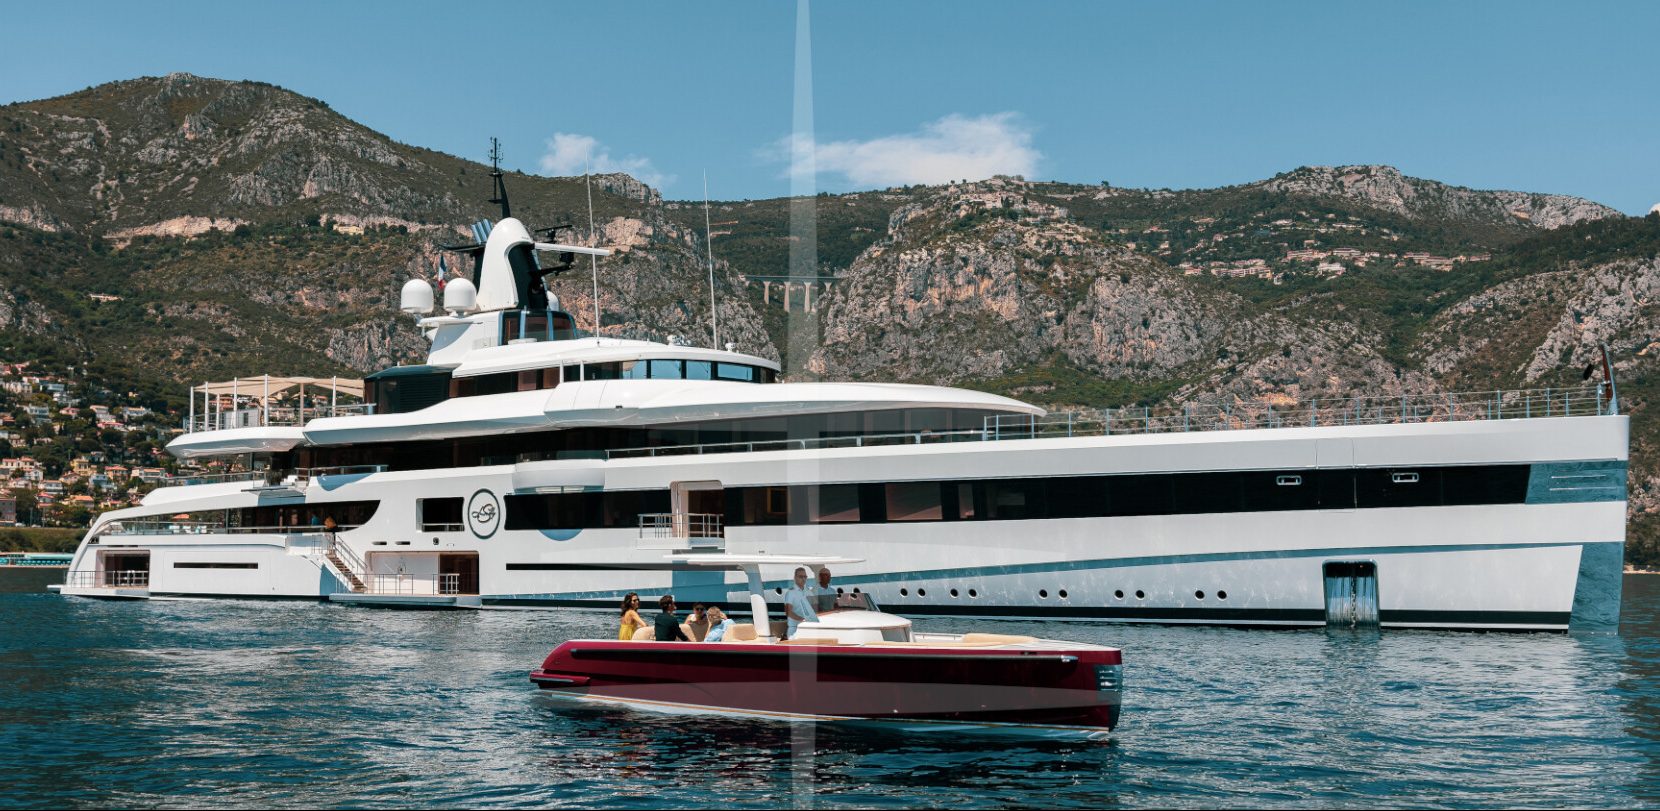 Luxury charter yacht Lady S wins two major awards